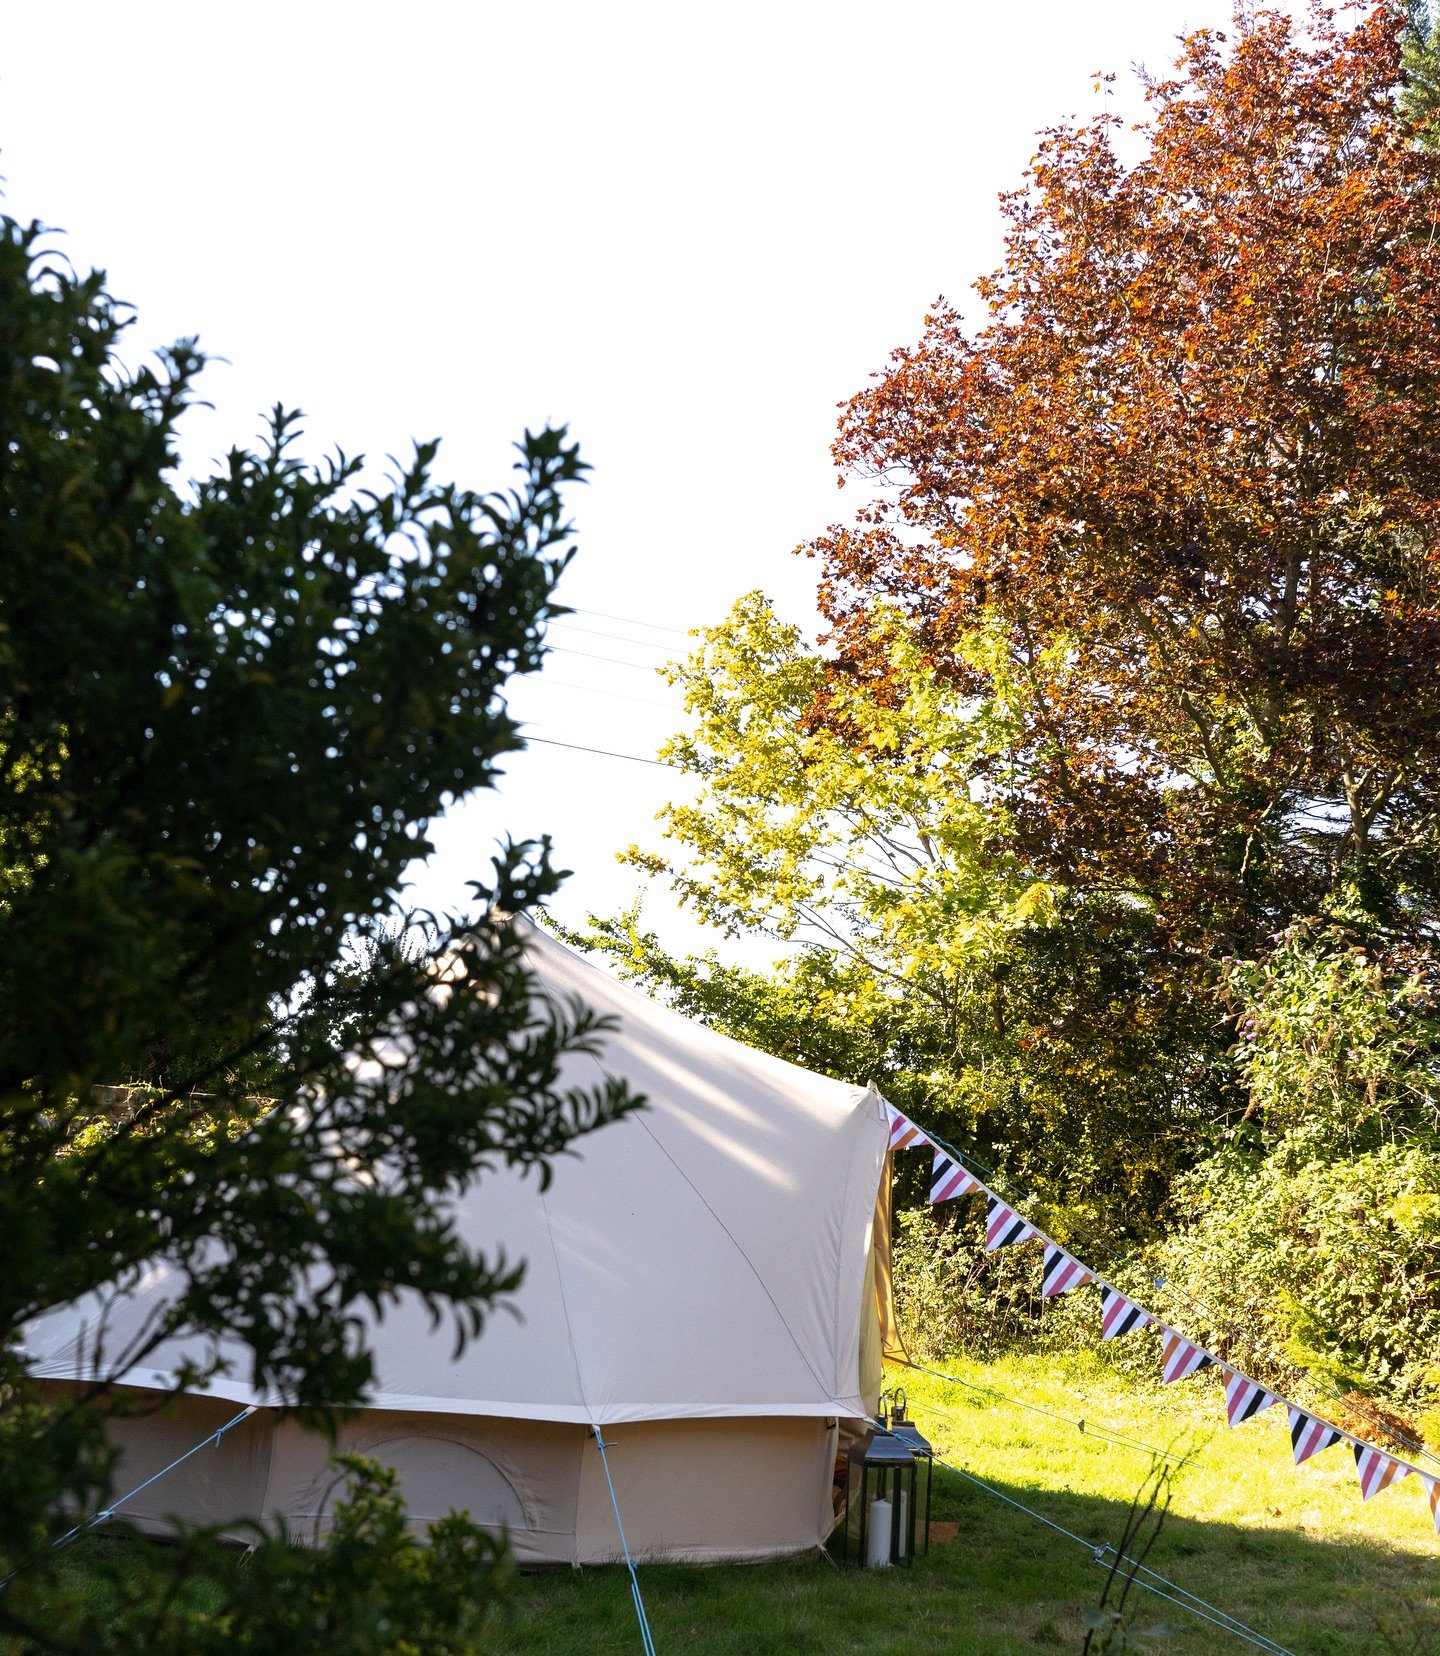 ⛺️ BELL TENTS ⛺️ 

Our Bell Tents are proving so popular for this summers events- from weddings to children&rsquo;s parties to music festivals and charity events! We can&rsquo;t wait to pitch them! 💕 

#belltents #belltent #belltentwedding #sailclot